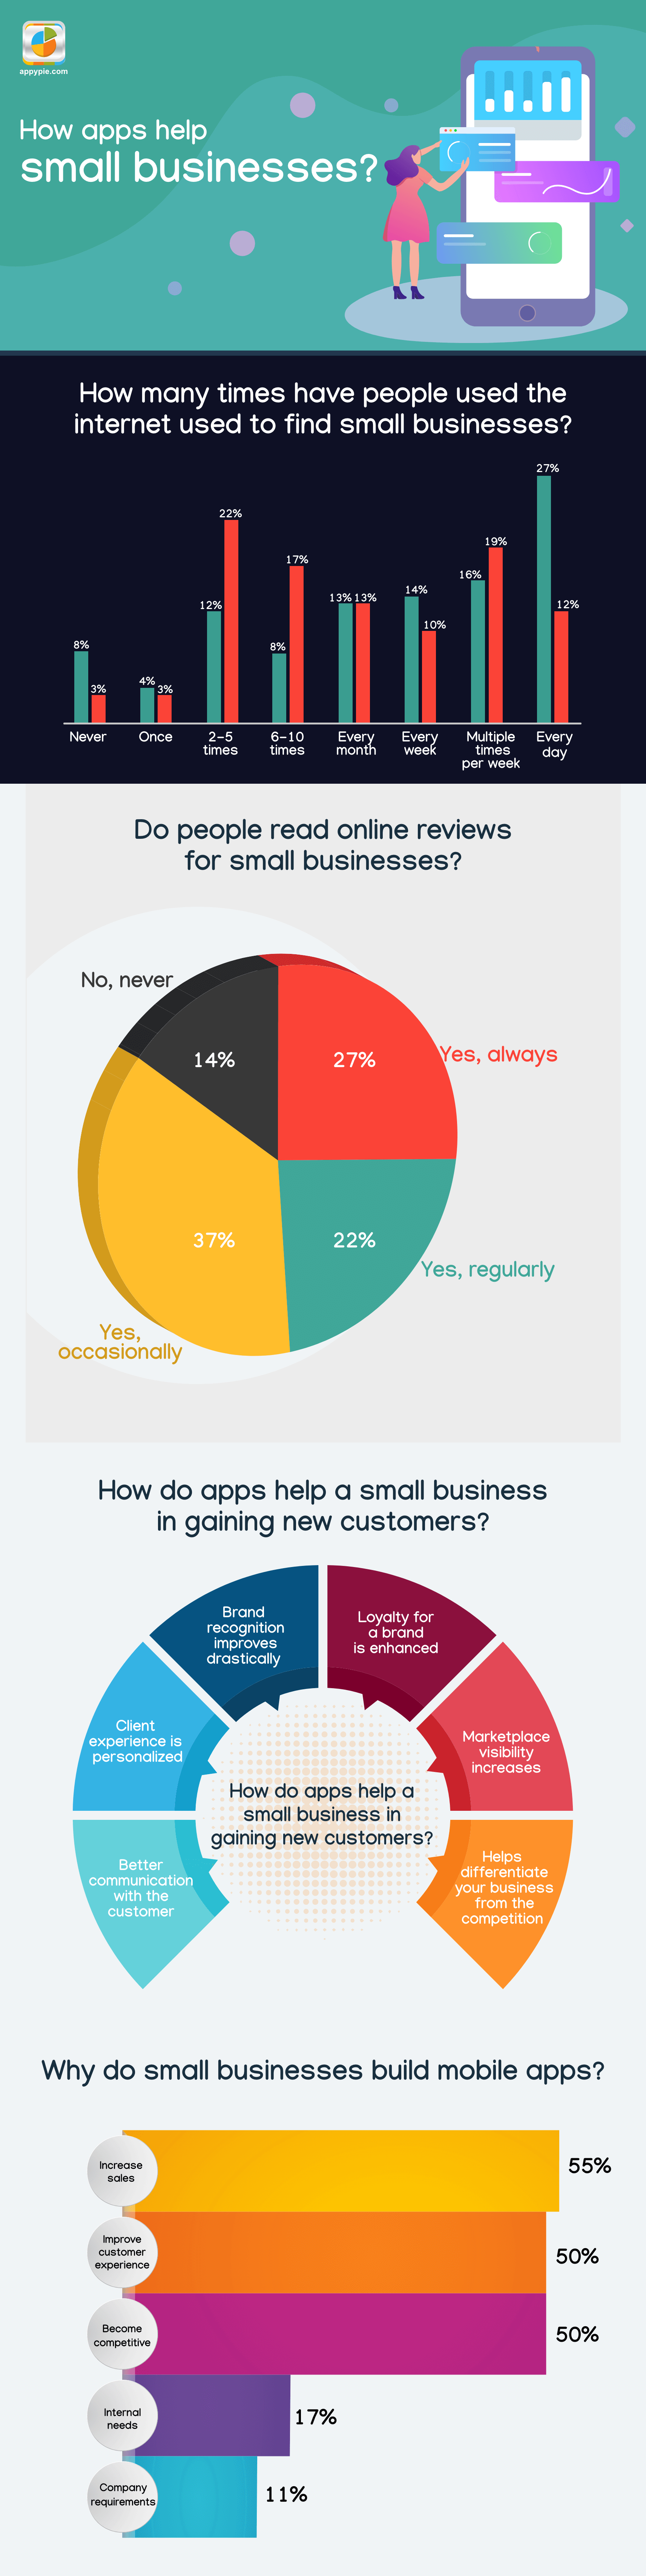 6 Small Businesses that can Benefit with Apps